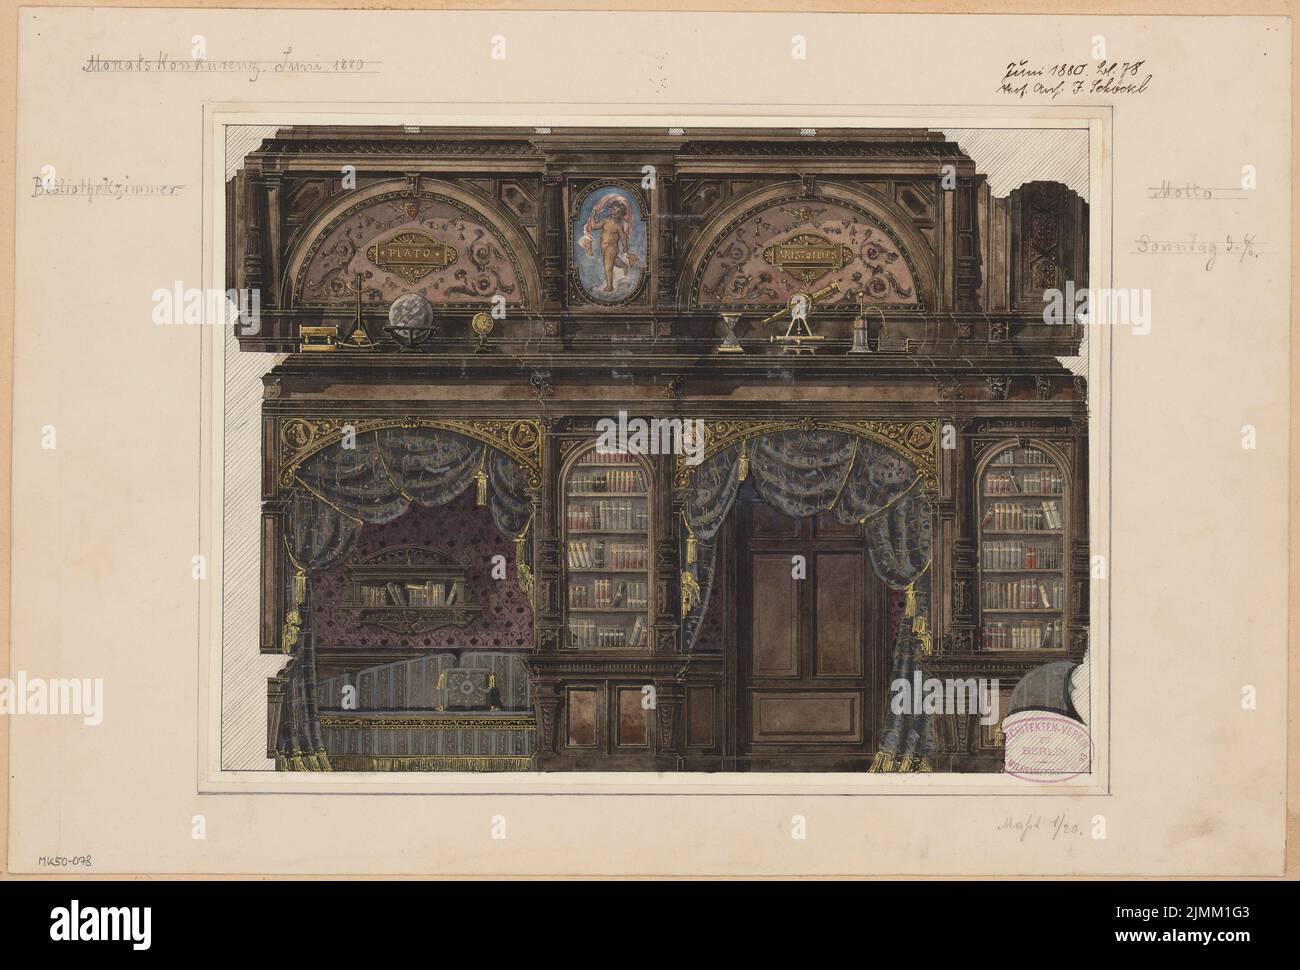 Schöckl Ignaz (1855-1928), library room. Monthly competition June 1880 (06.1880): Riss wall with door 1:20. Ink and pencil watercolored on paper, 32.6 x 48.1 cm (including scan edges) Stock Photo